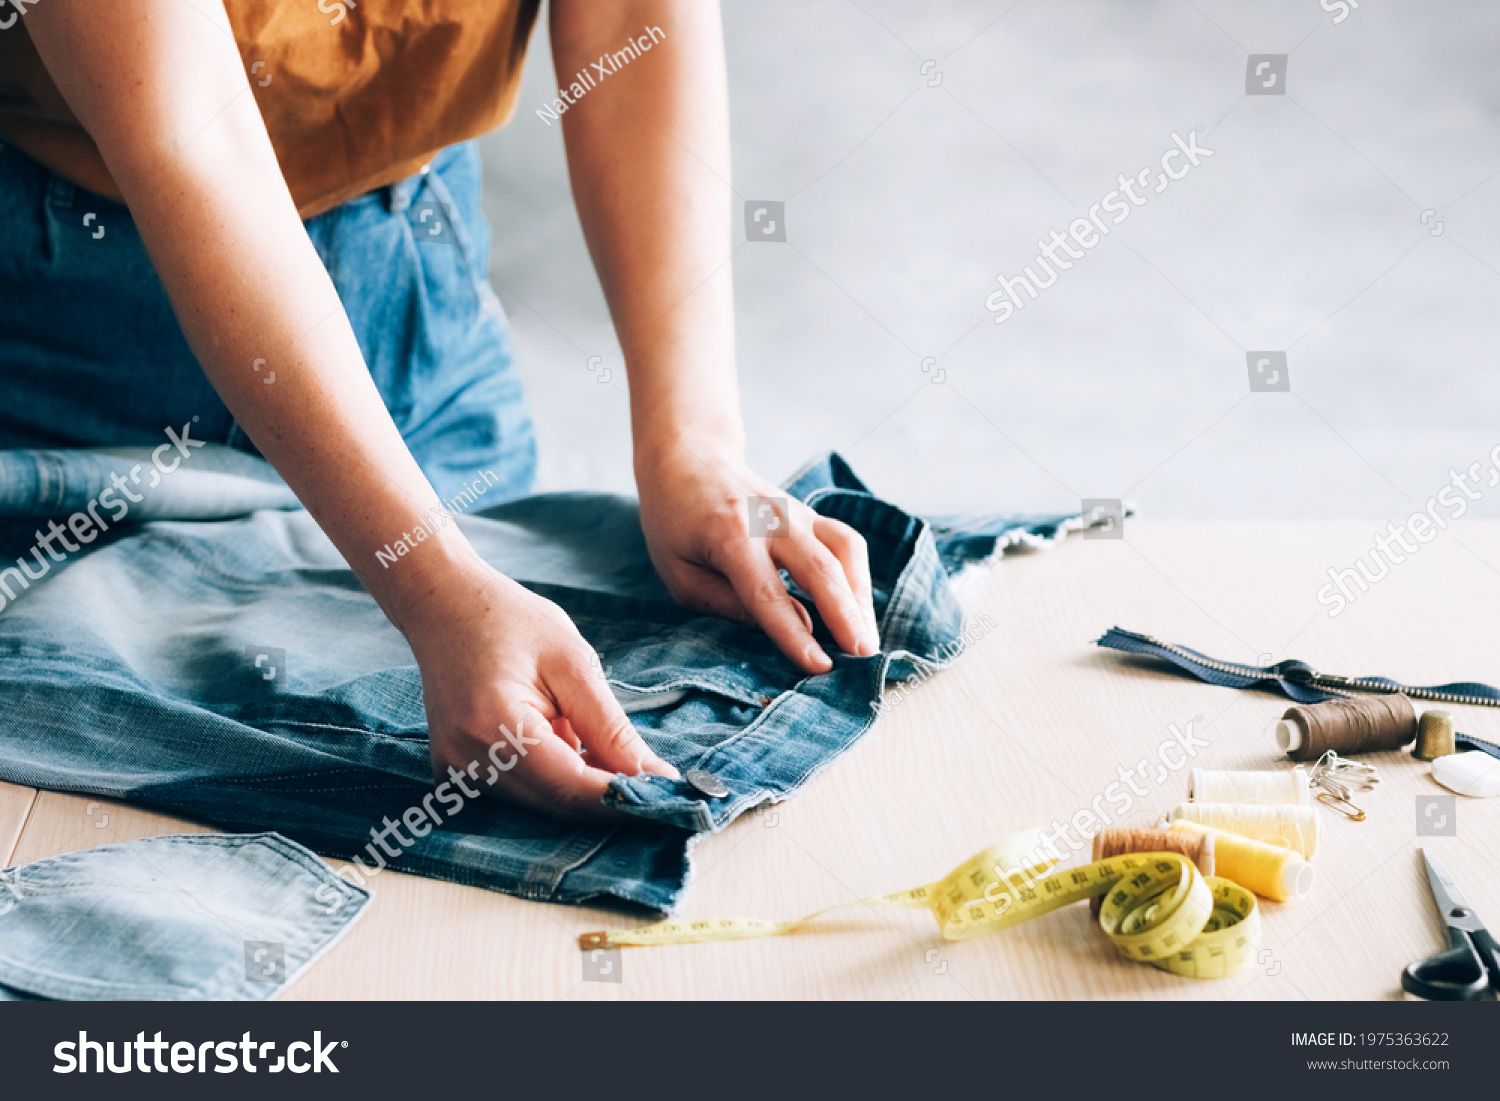 Woman repairs sews reuses fabric from old denim clothes economical reuse. DIY Hobby Reuse Recycling #1975363622